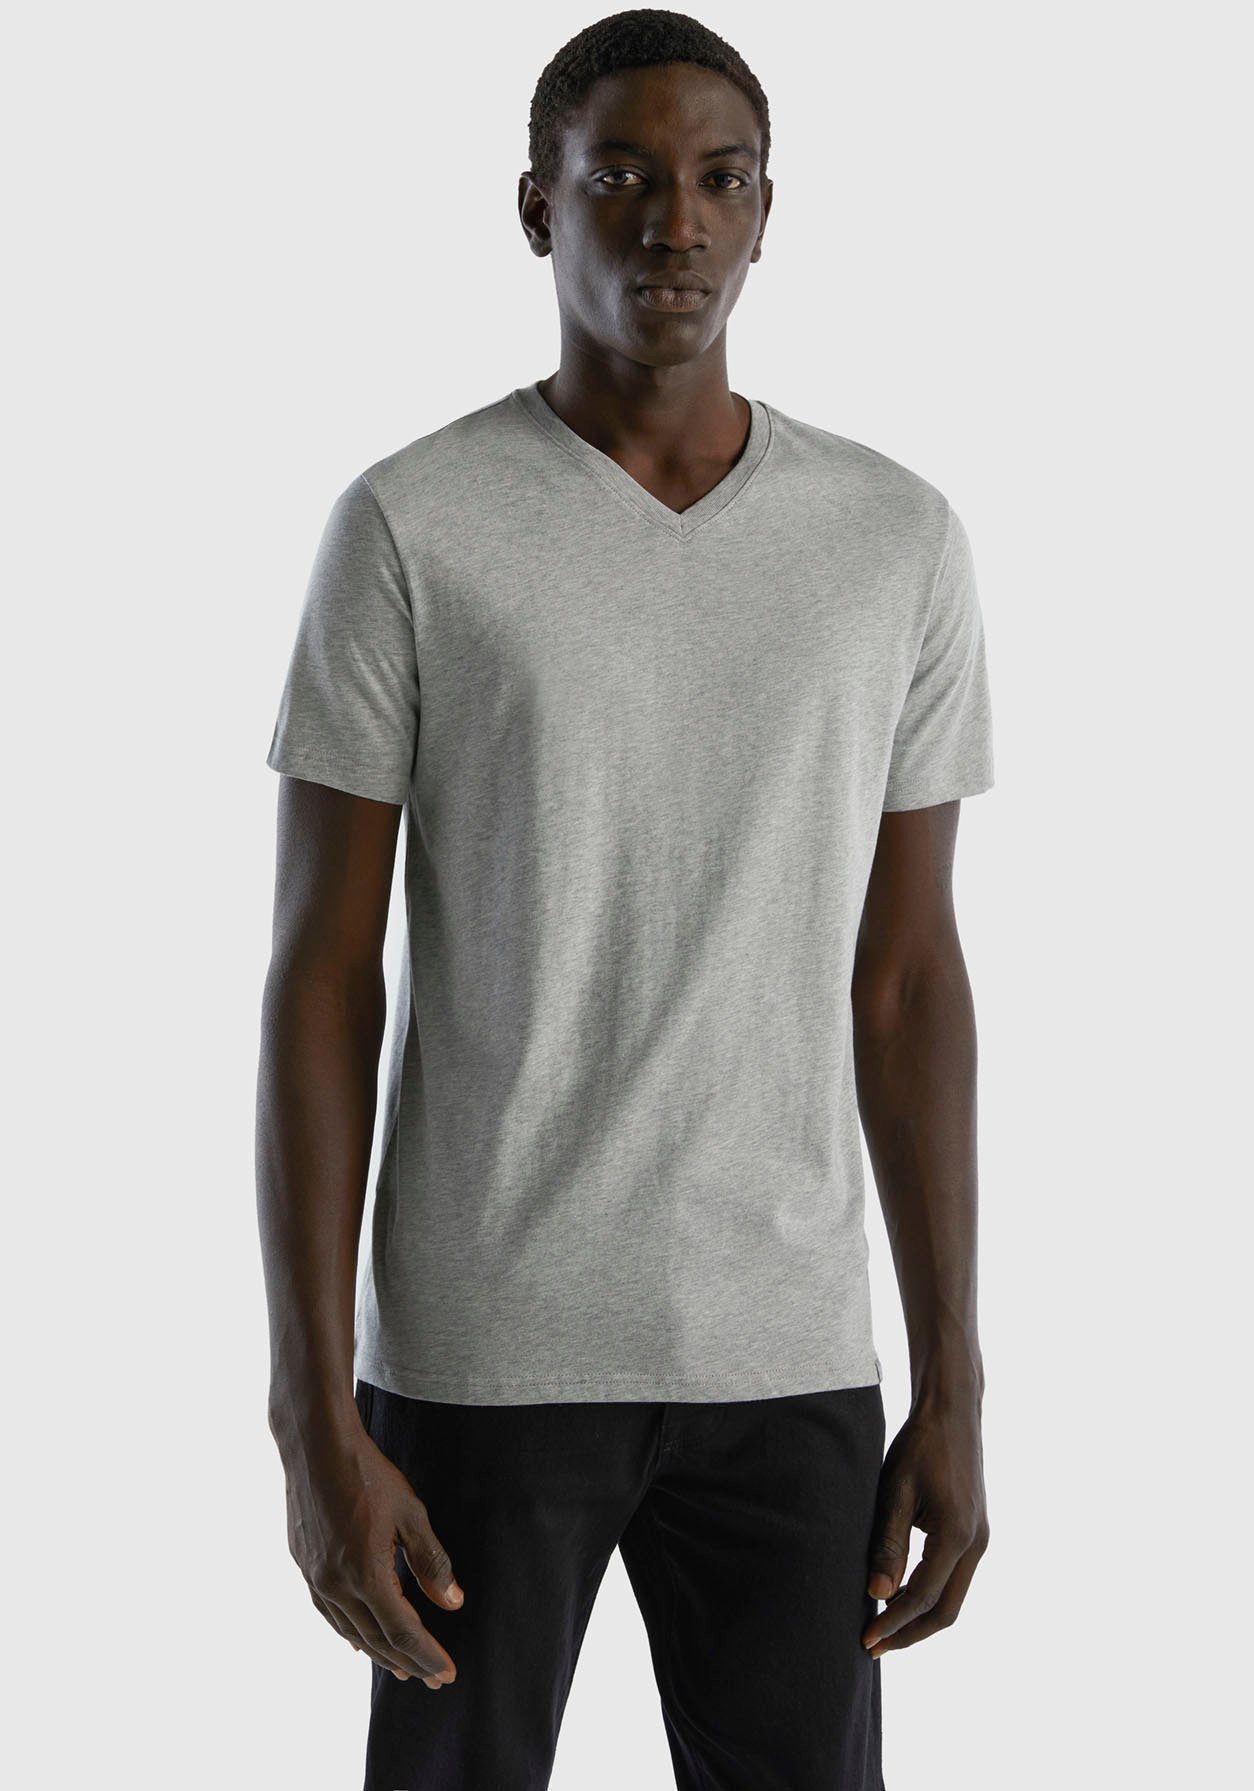 United Colors of Benetton T-Shirt in cleaner Basic-Form